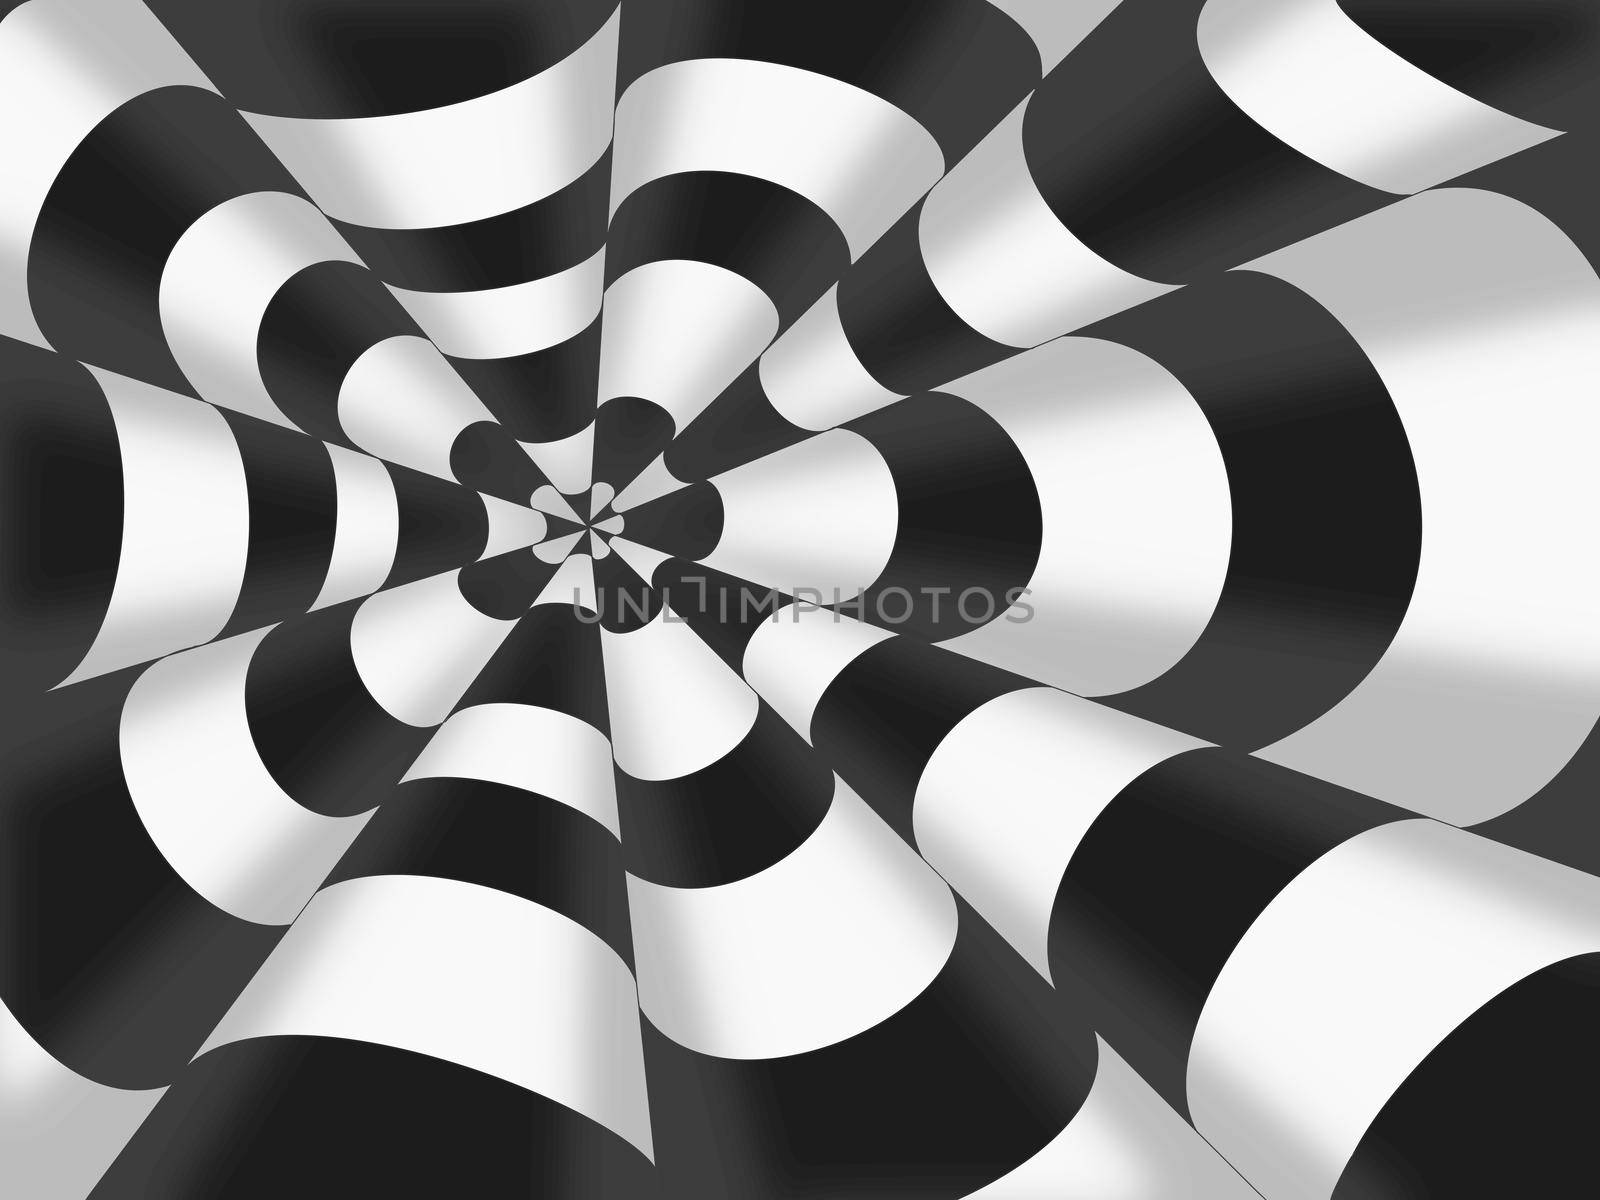 3d drawing of striped cones. Volumetric pattern of black and white striped cones. Geometric abstract pattern.